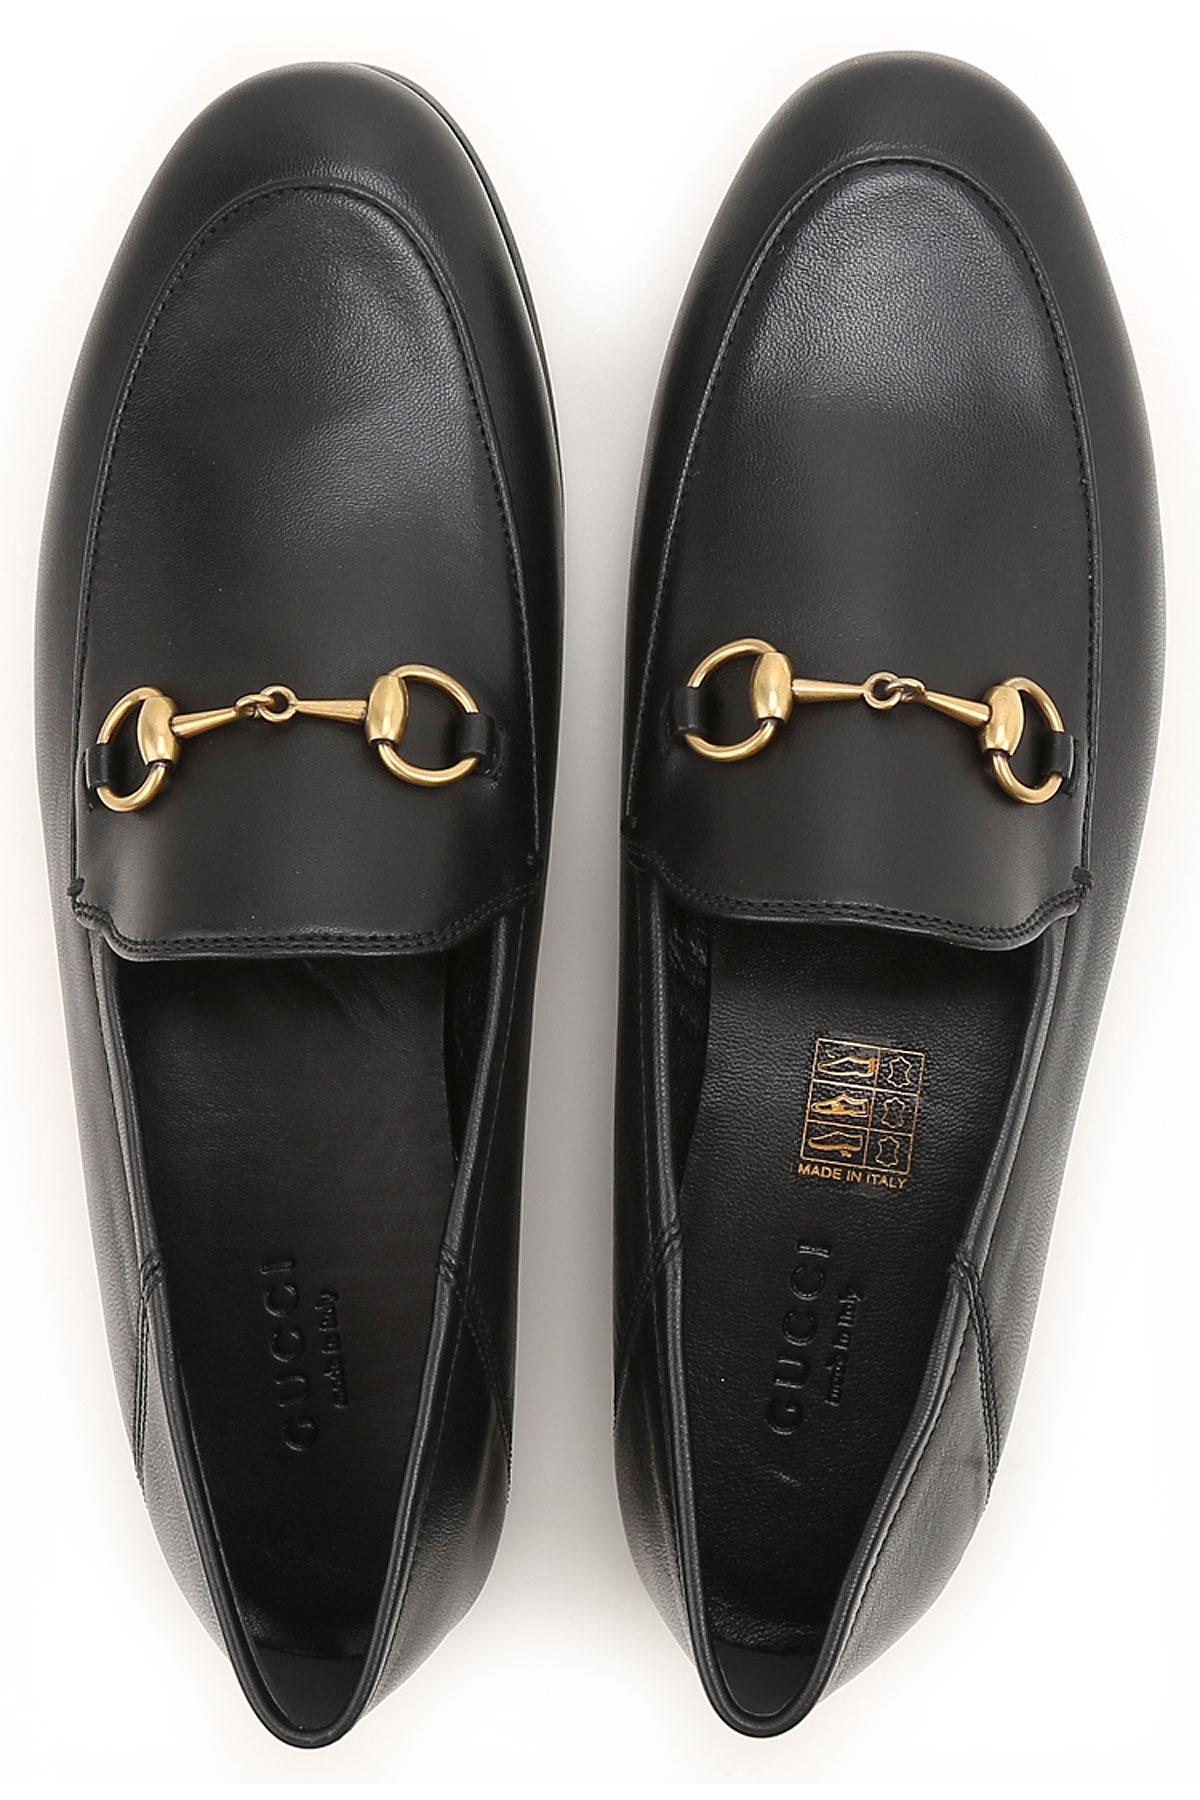 Gucci Leather Loafers For Women On Sale in Leather (Black) - Lyst